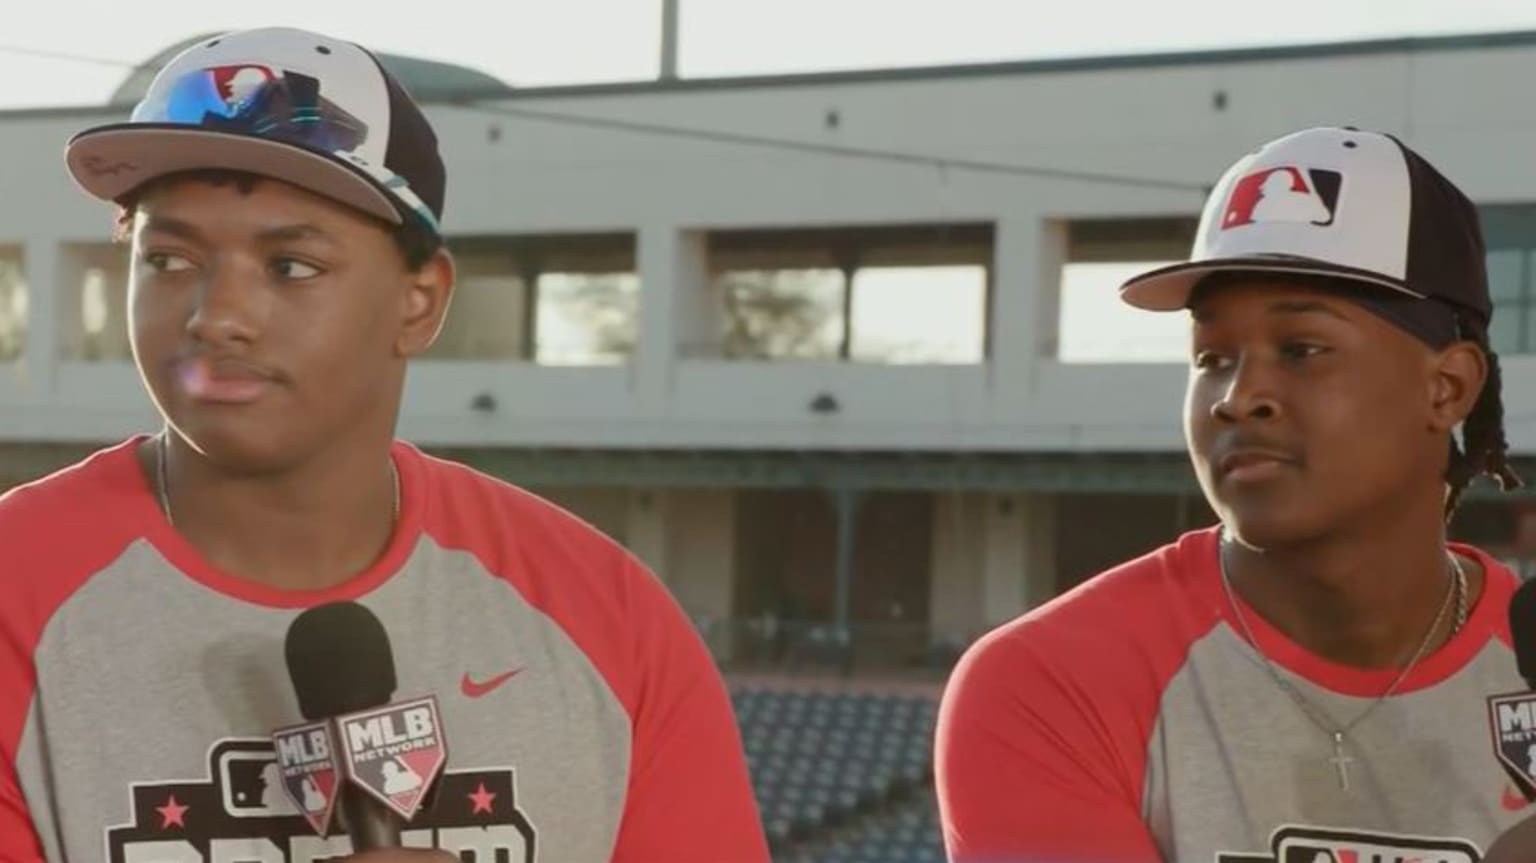 High school players Justyn Hart and Sir Jamison Jones are interviewed on MLB Network